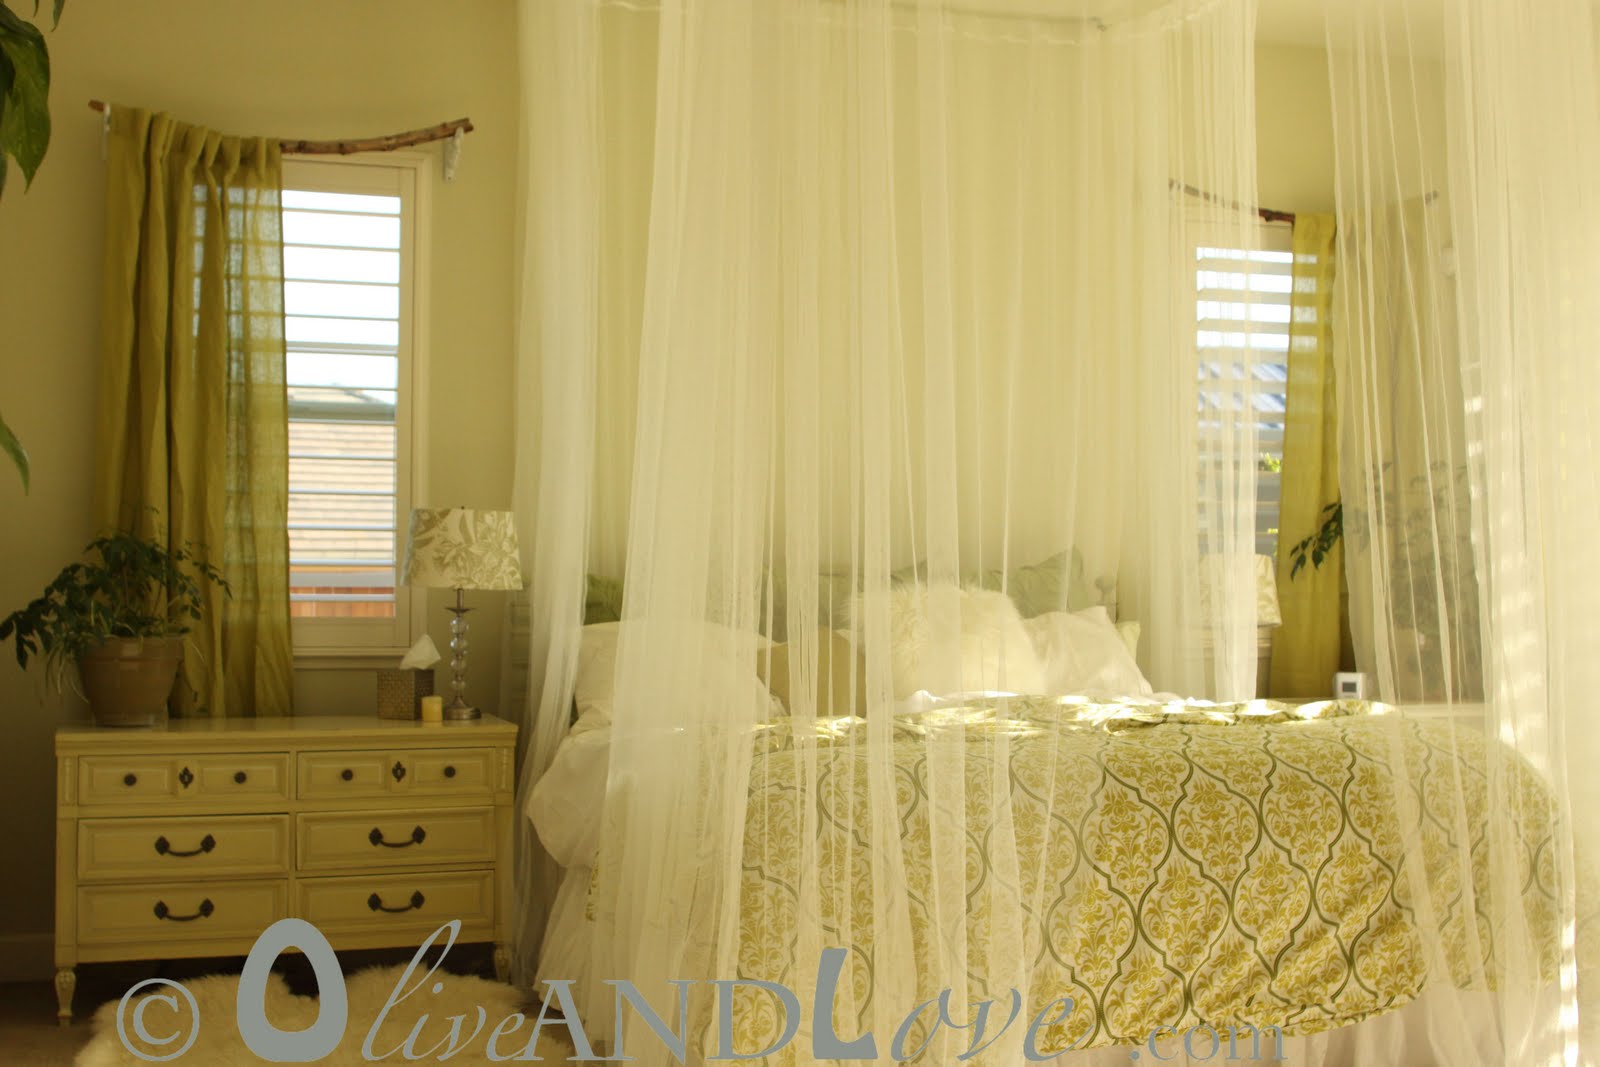 Ceiling mounted bed canopy consisting of eyebolts, turn buckles and ...